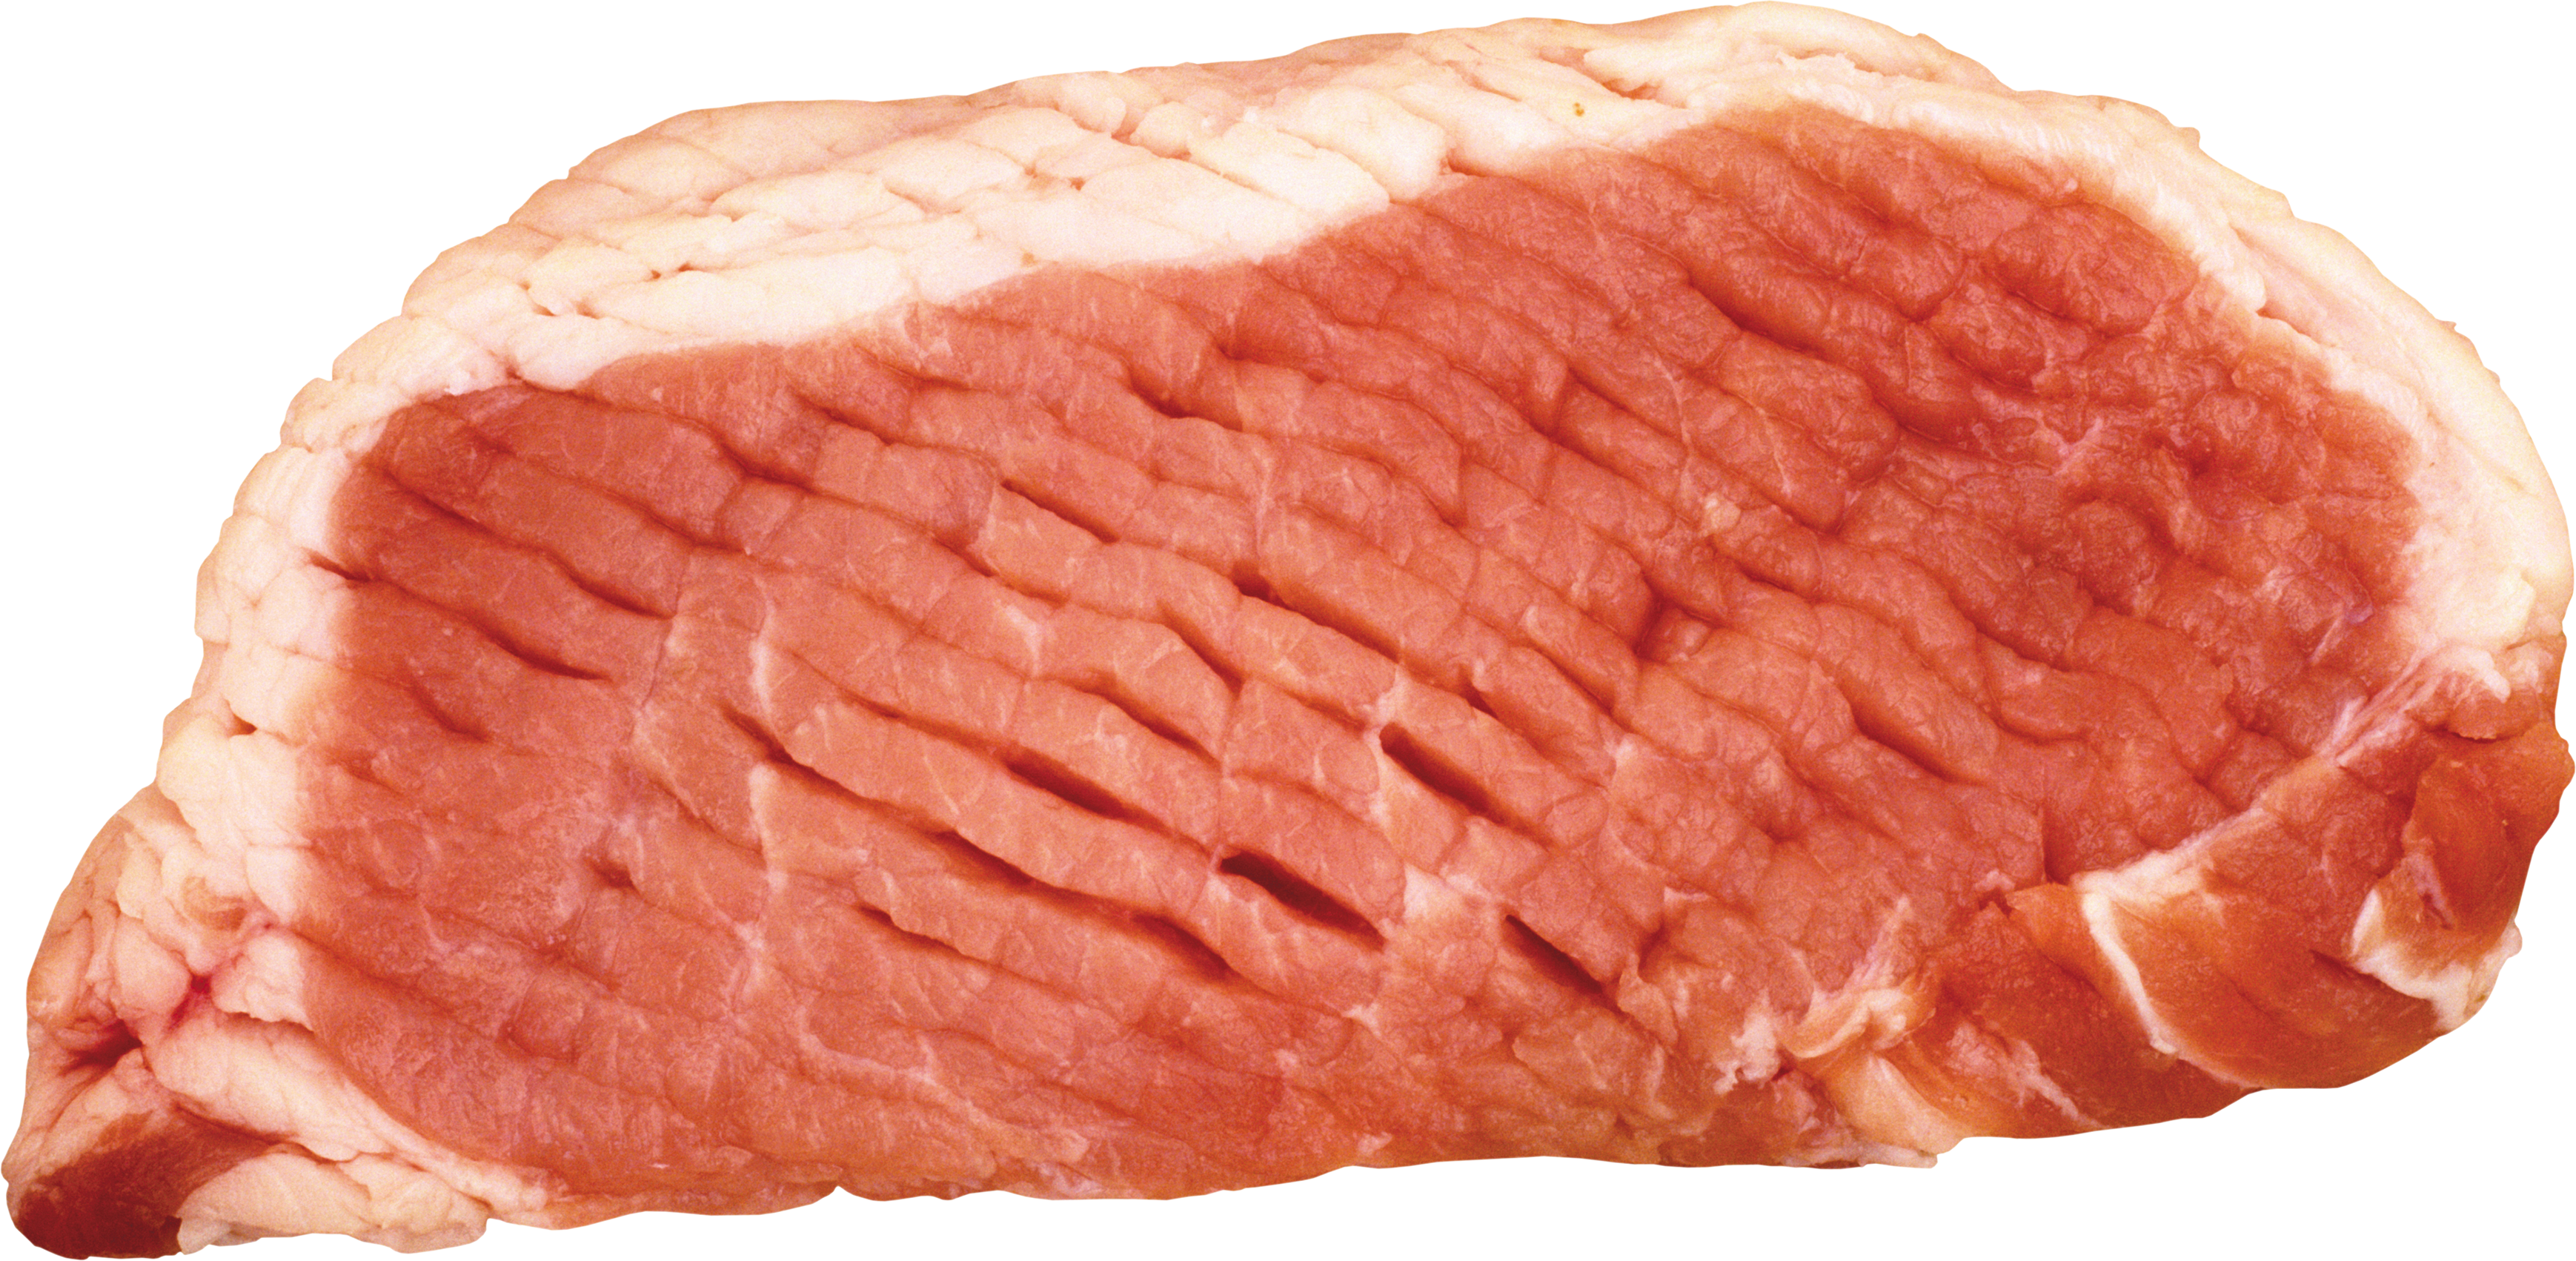 A Piece Of Raw Meat